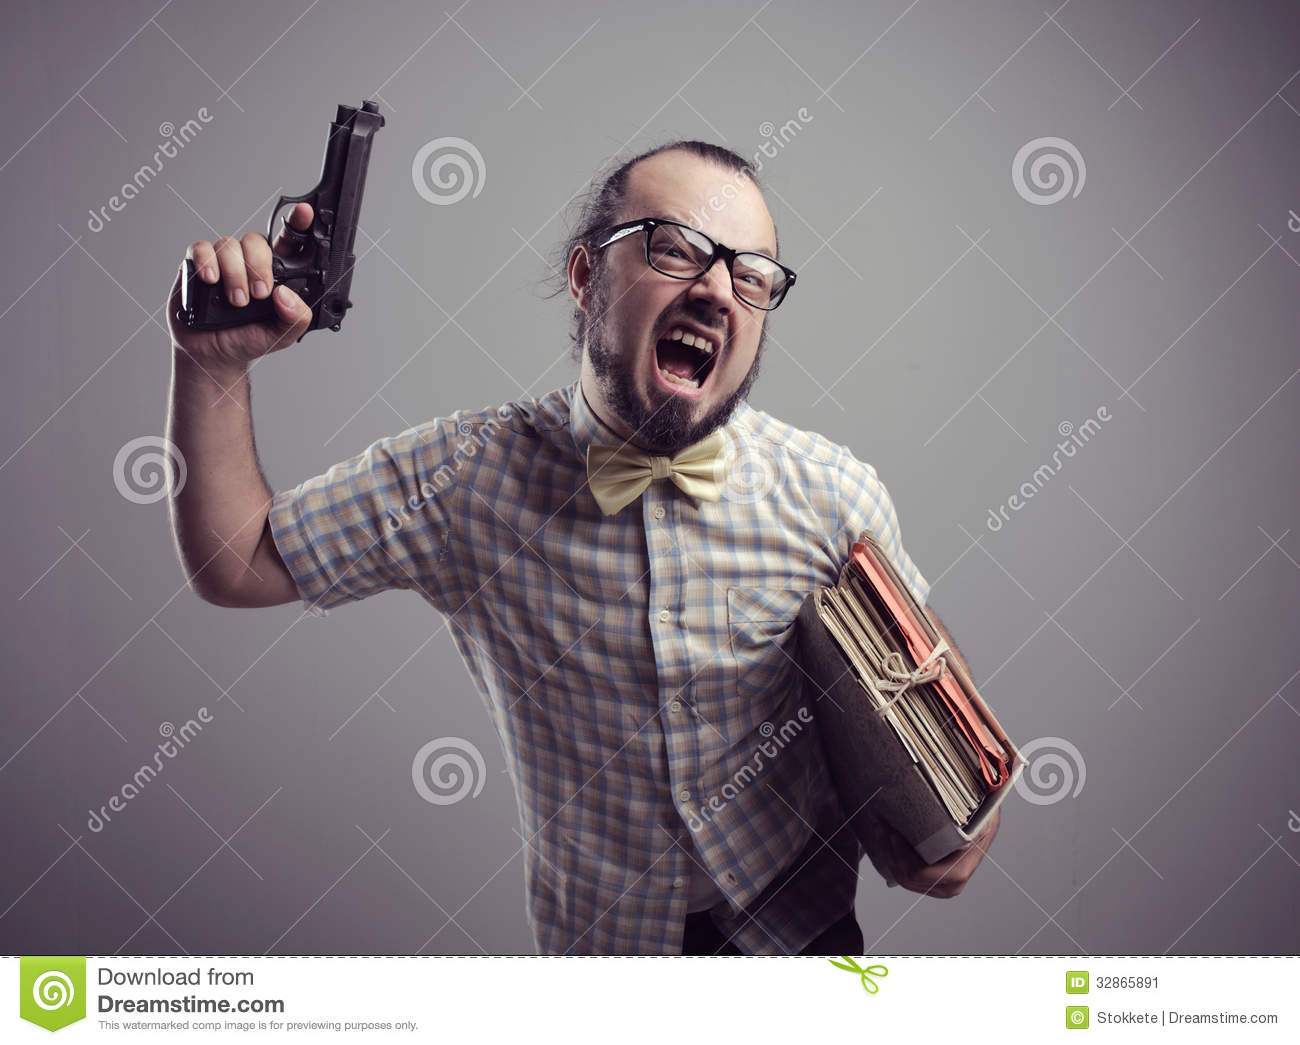 Office Worker Shouting With A Gun On Grey Background